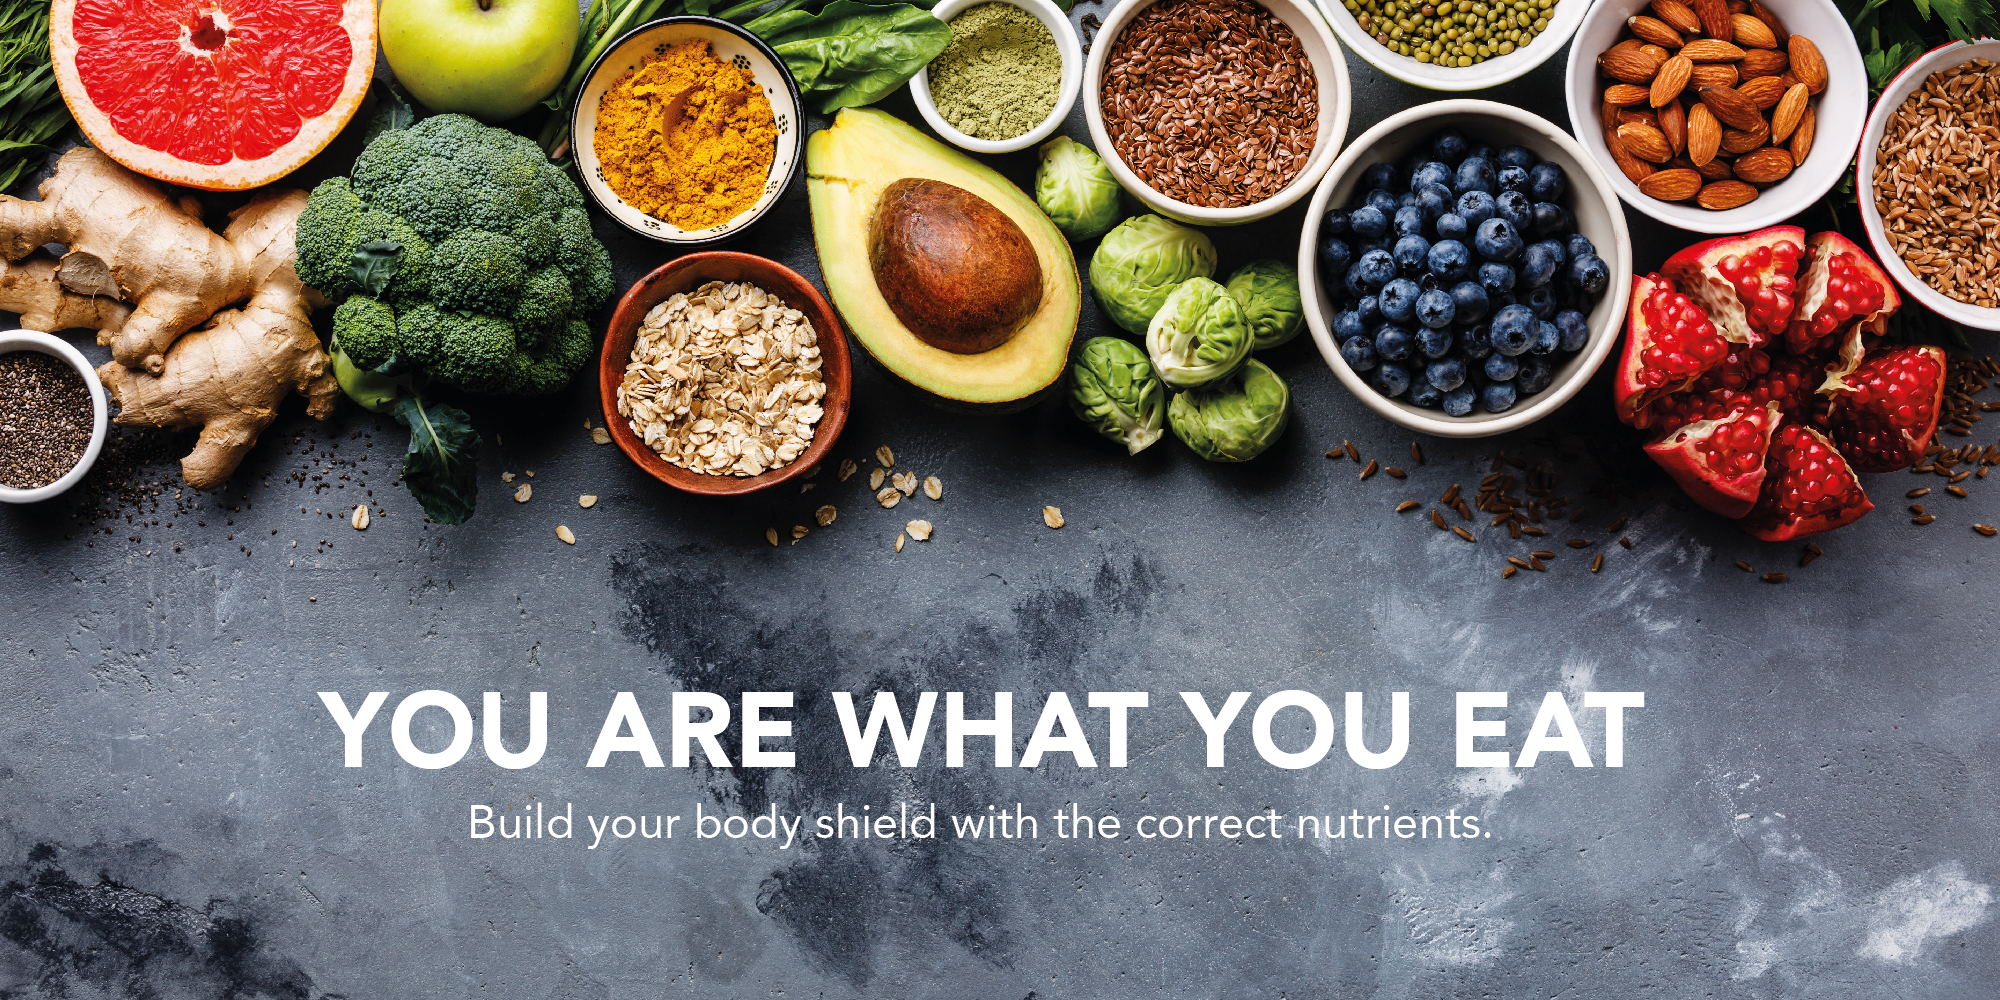 You Are What You Eat. Build your body shield with the right nutrients.